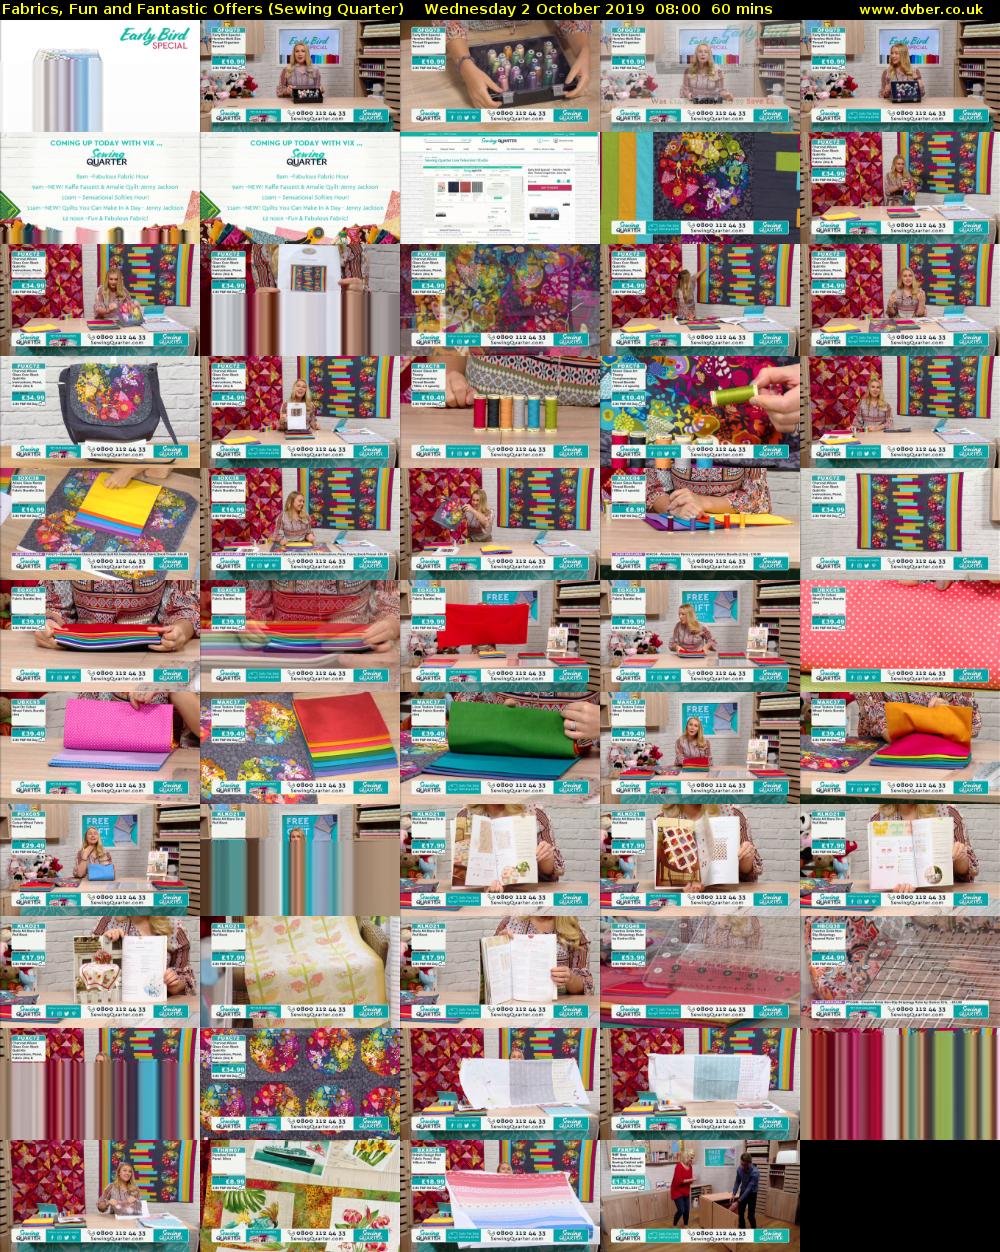 Fabrics, Fun and Fantastic Offers (Sewing Quarter) Wednesday 2 October 2019 08:00 - 09:00